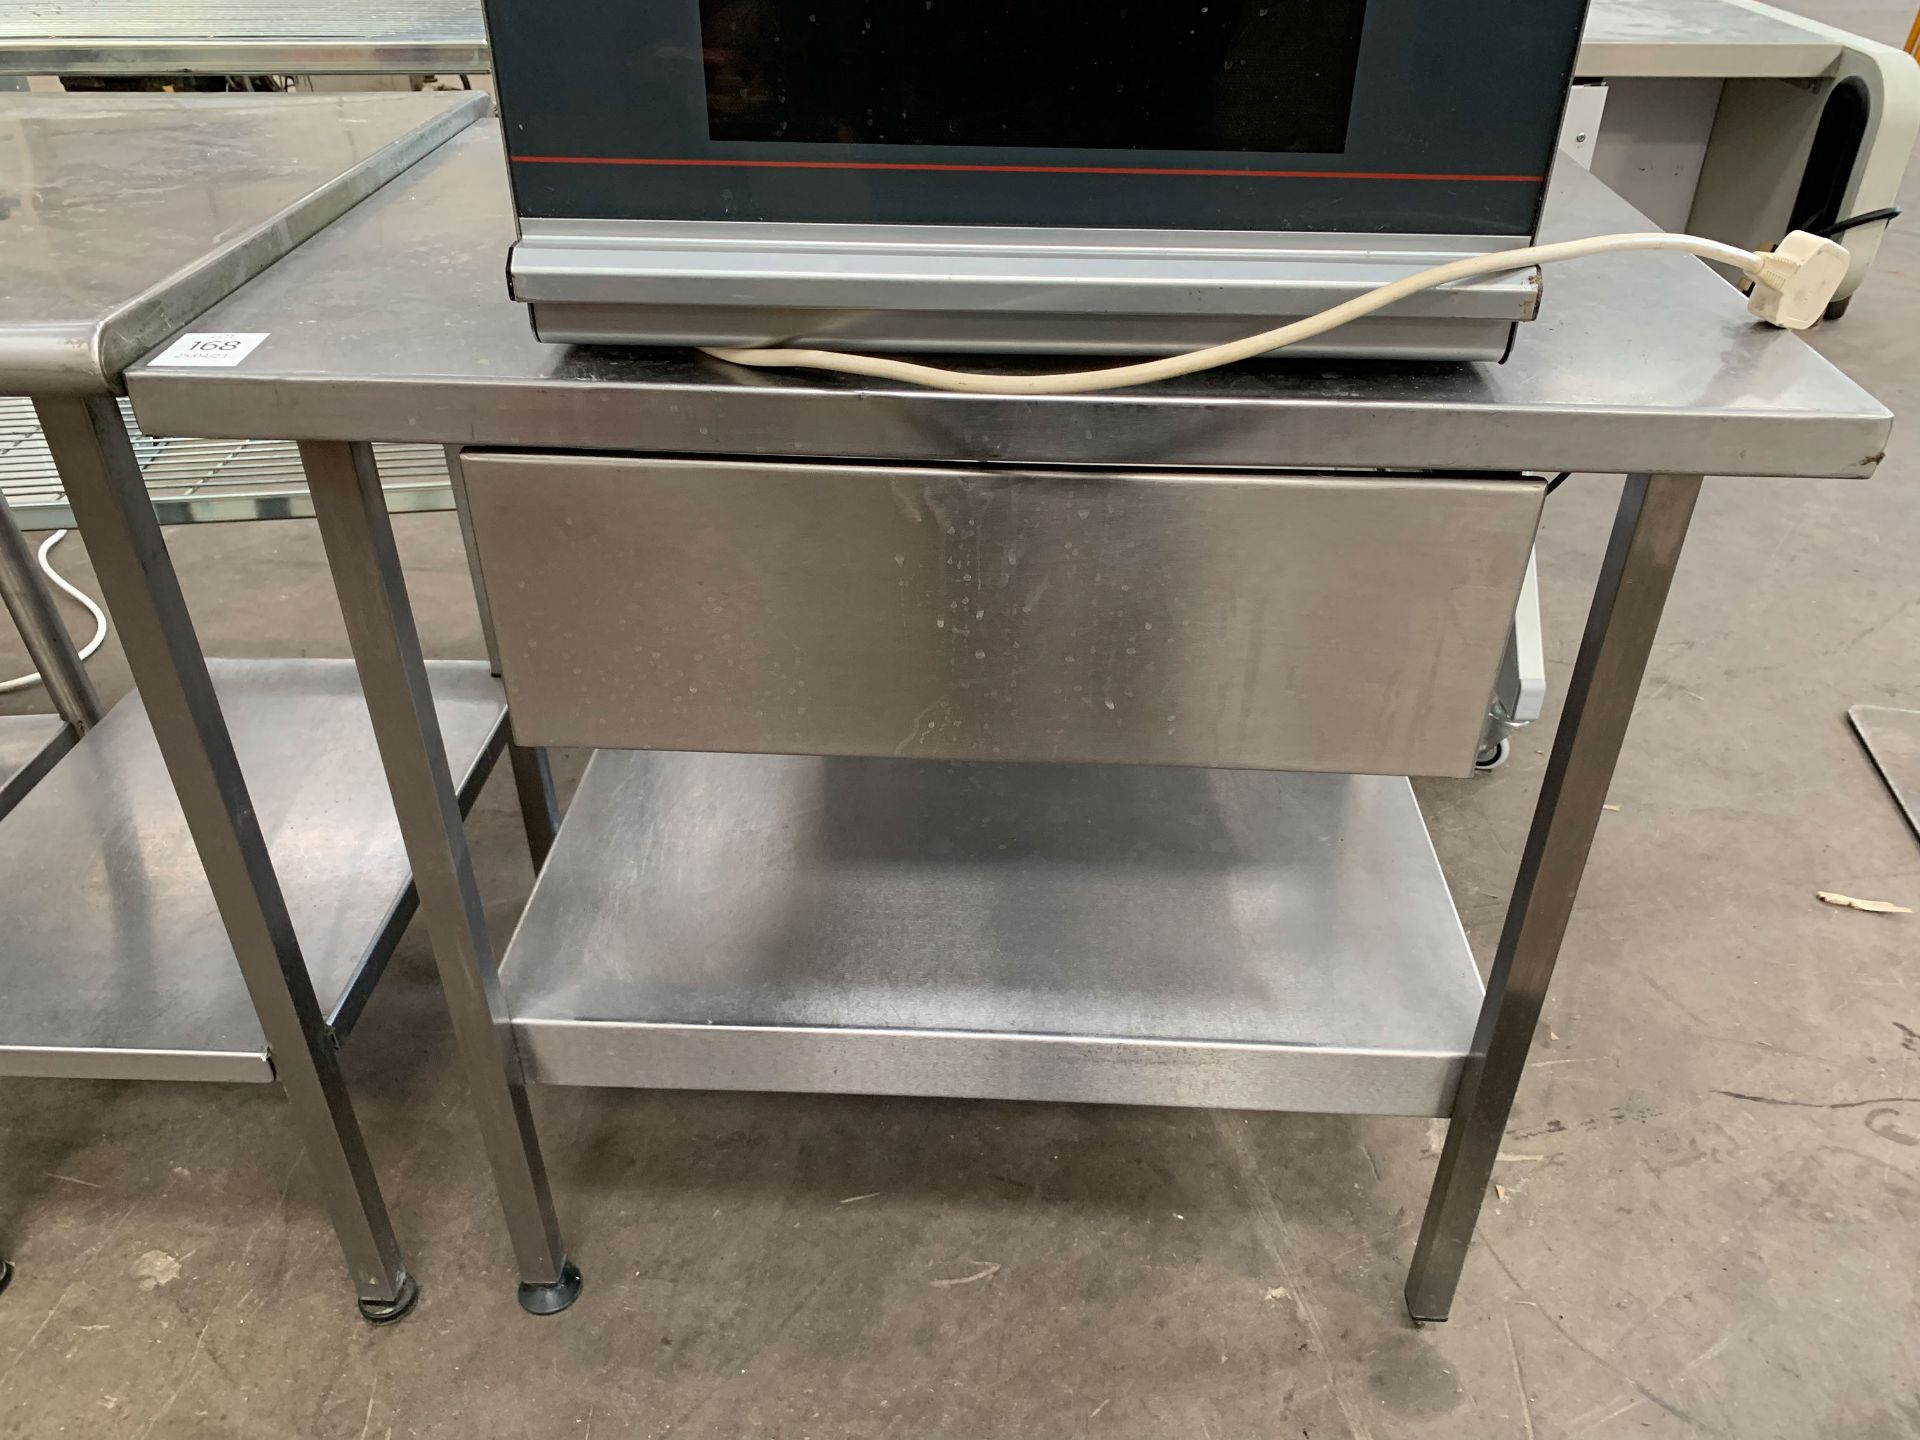 Stainless Steel Commercial Catering Tables/Counters - Image 2 of 4